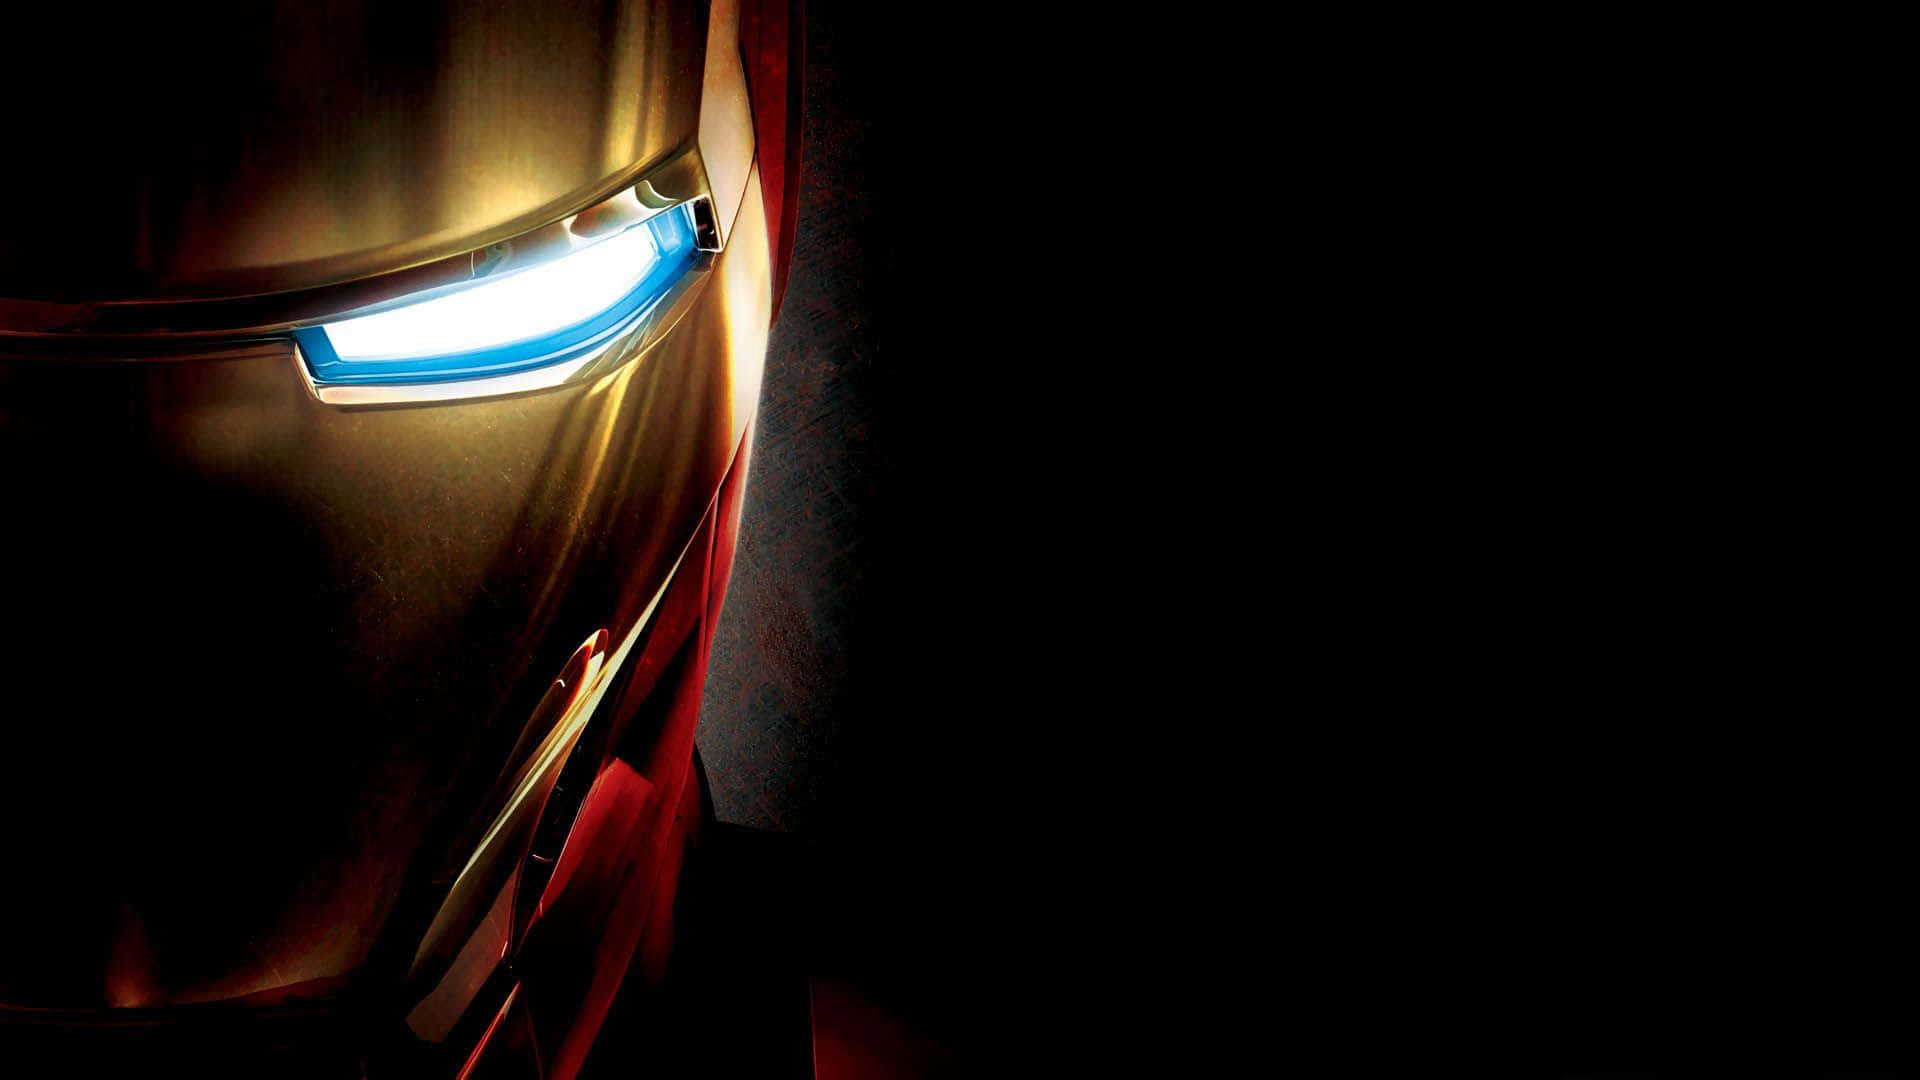 Iron Man 3: Iron Man Suited Up For Battle Background